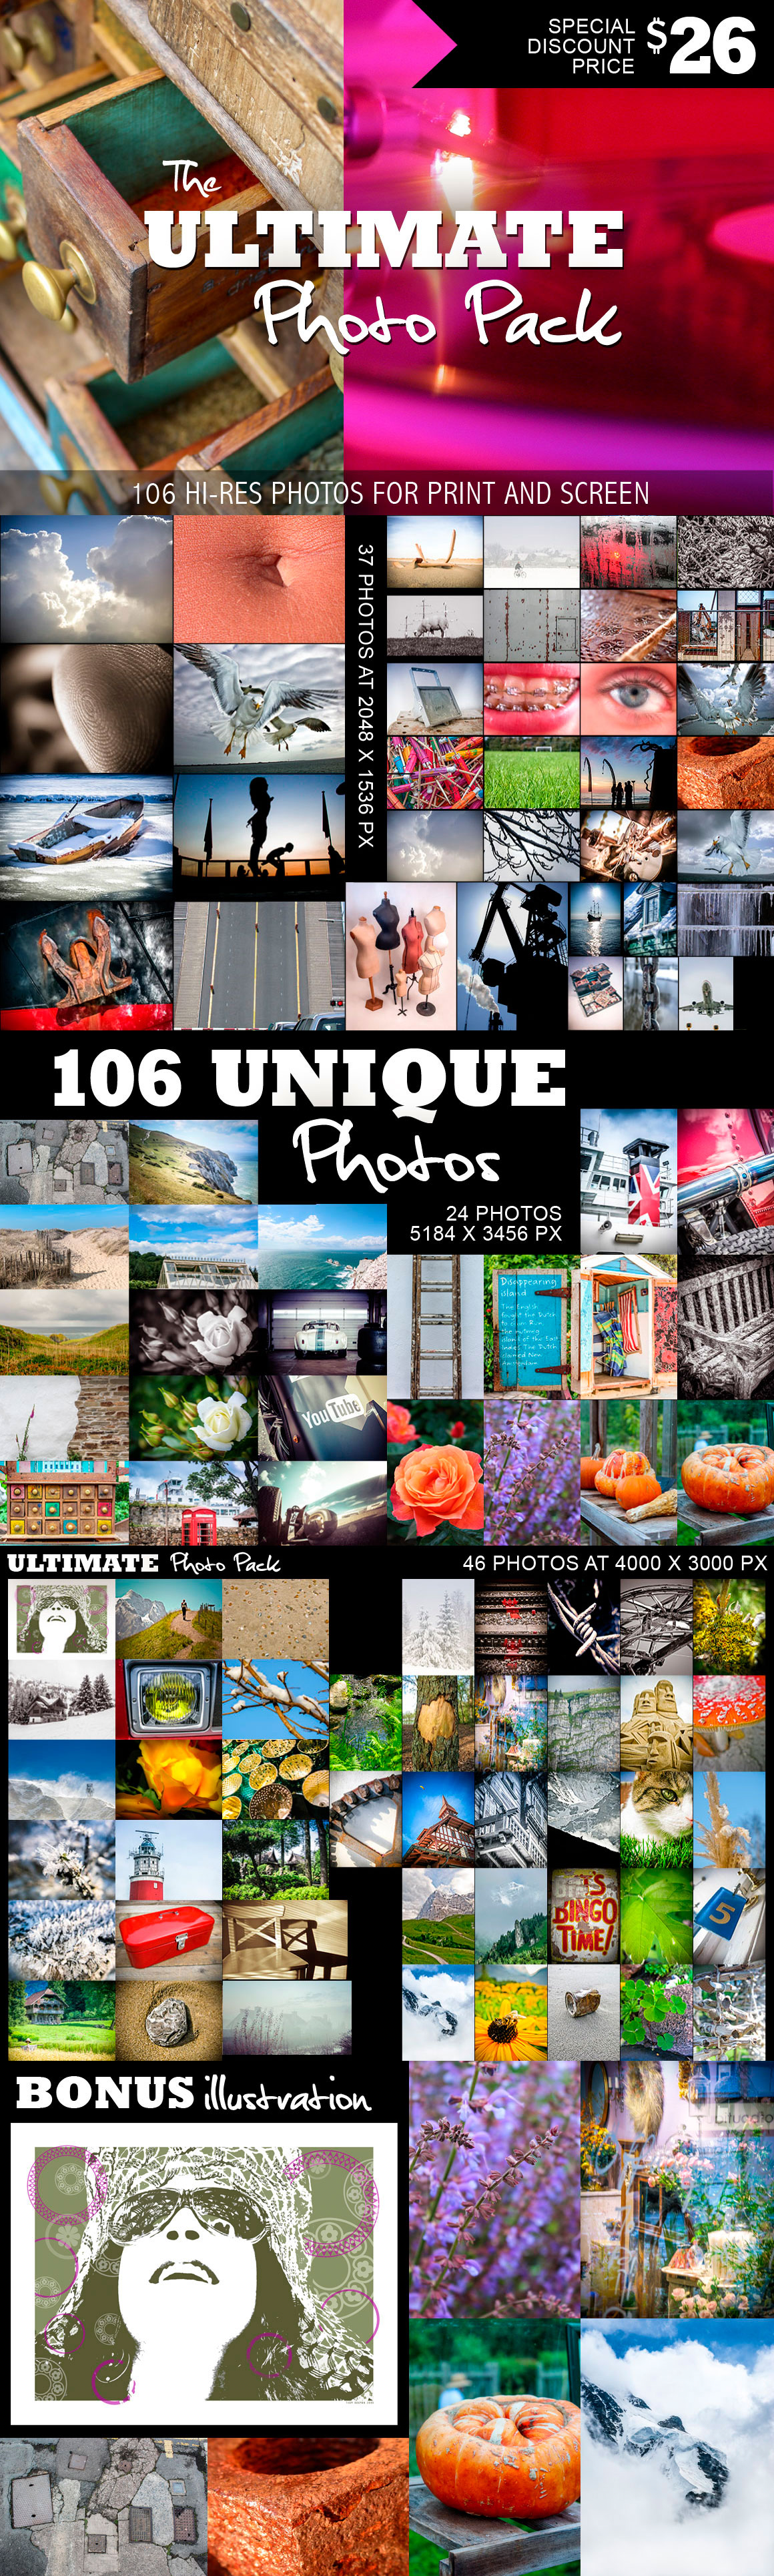 ultimate-photo-pack